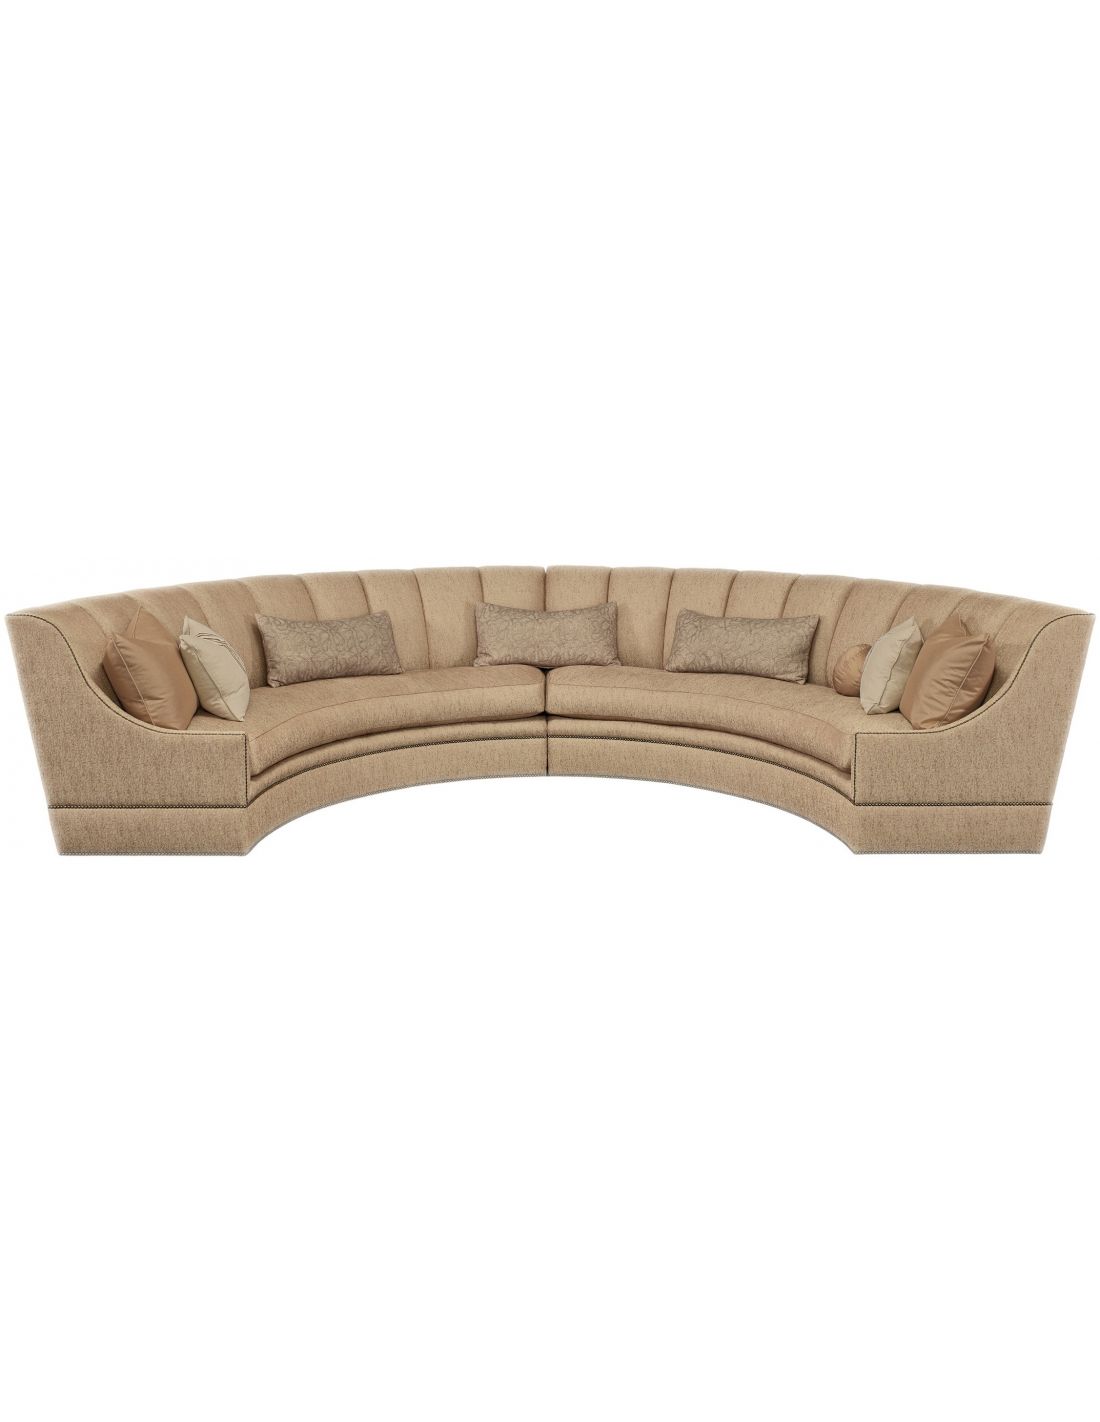 Half Round Luxury Sectional Sofa, Half Round Leather Couch